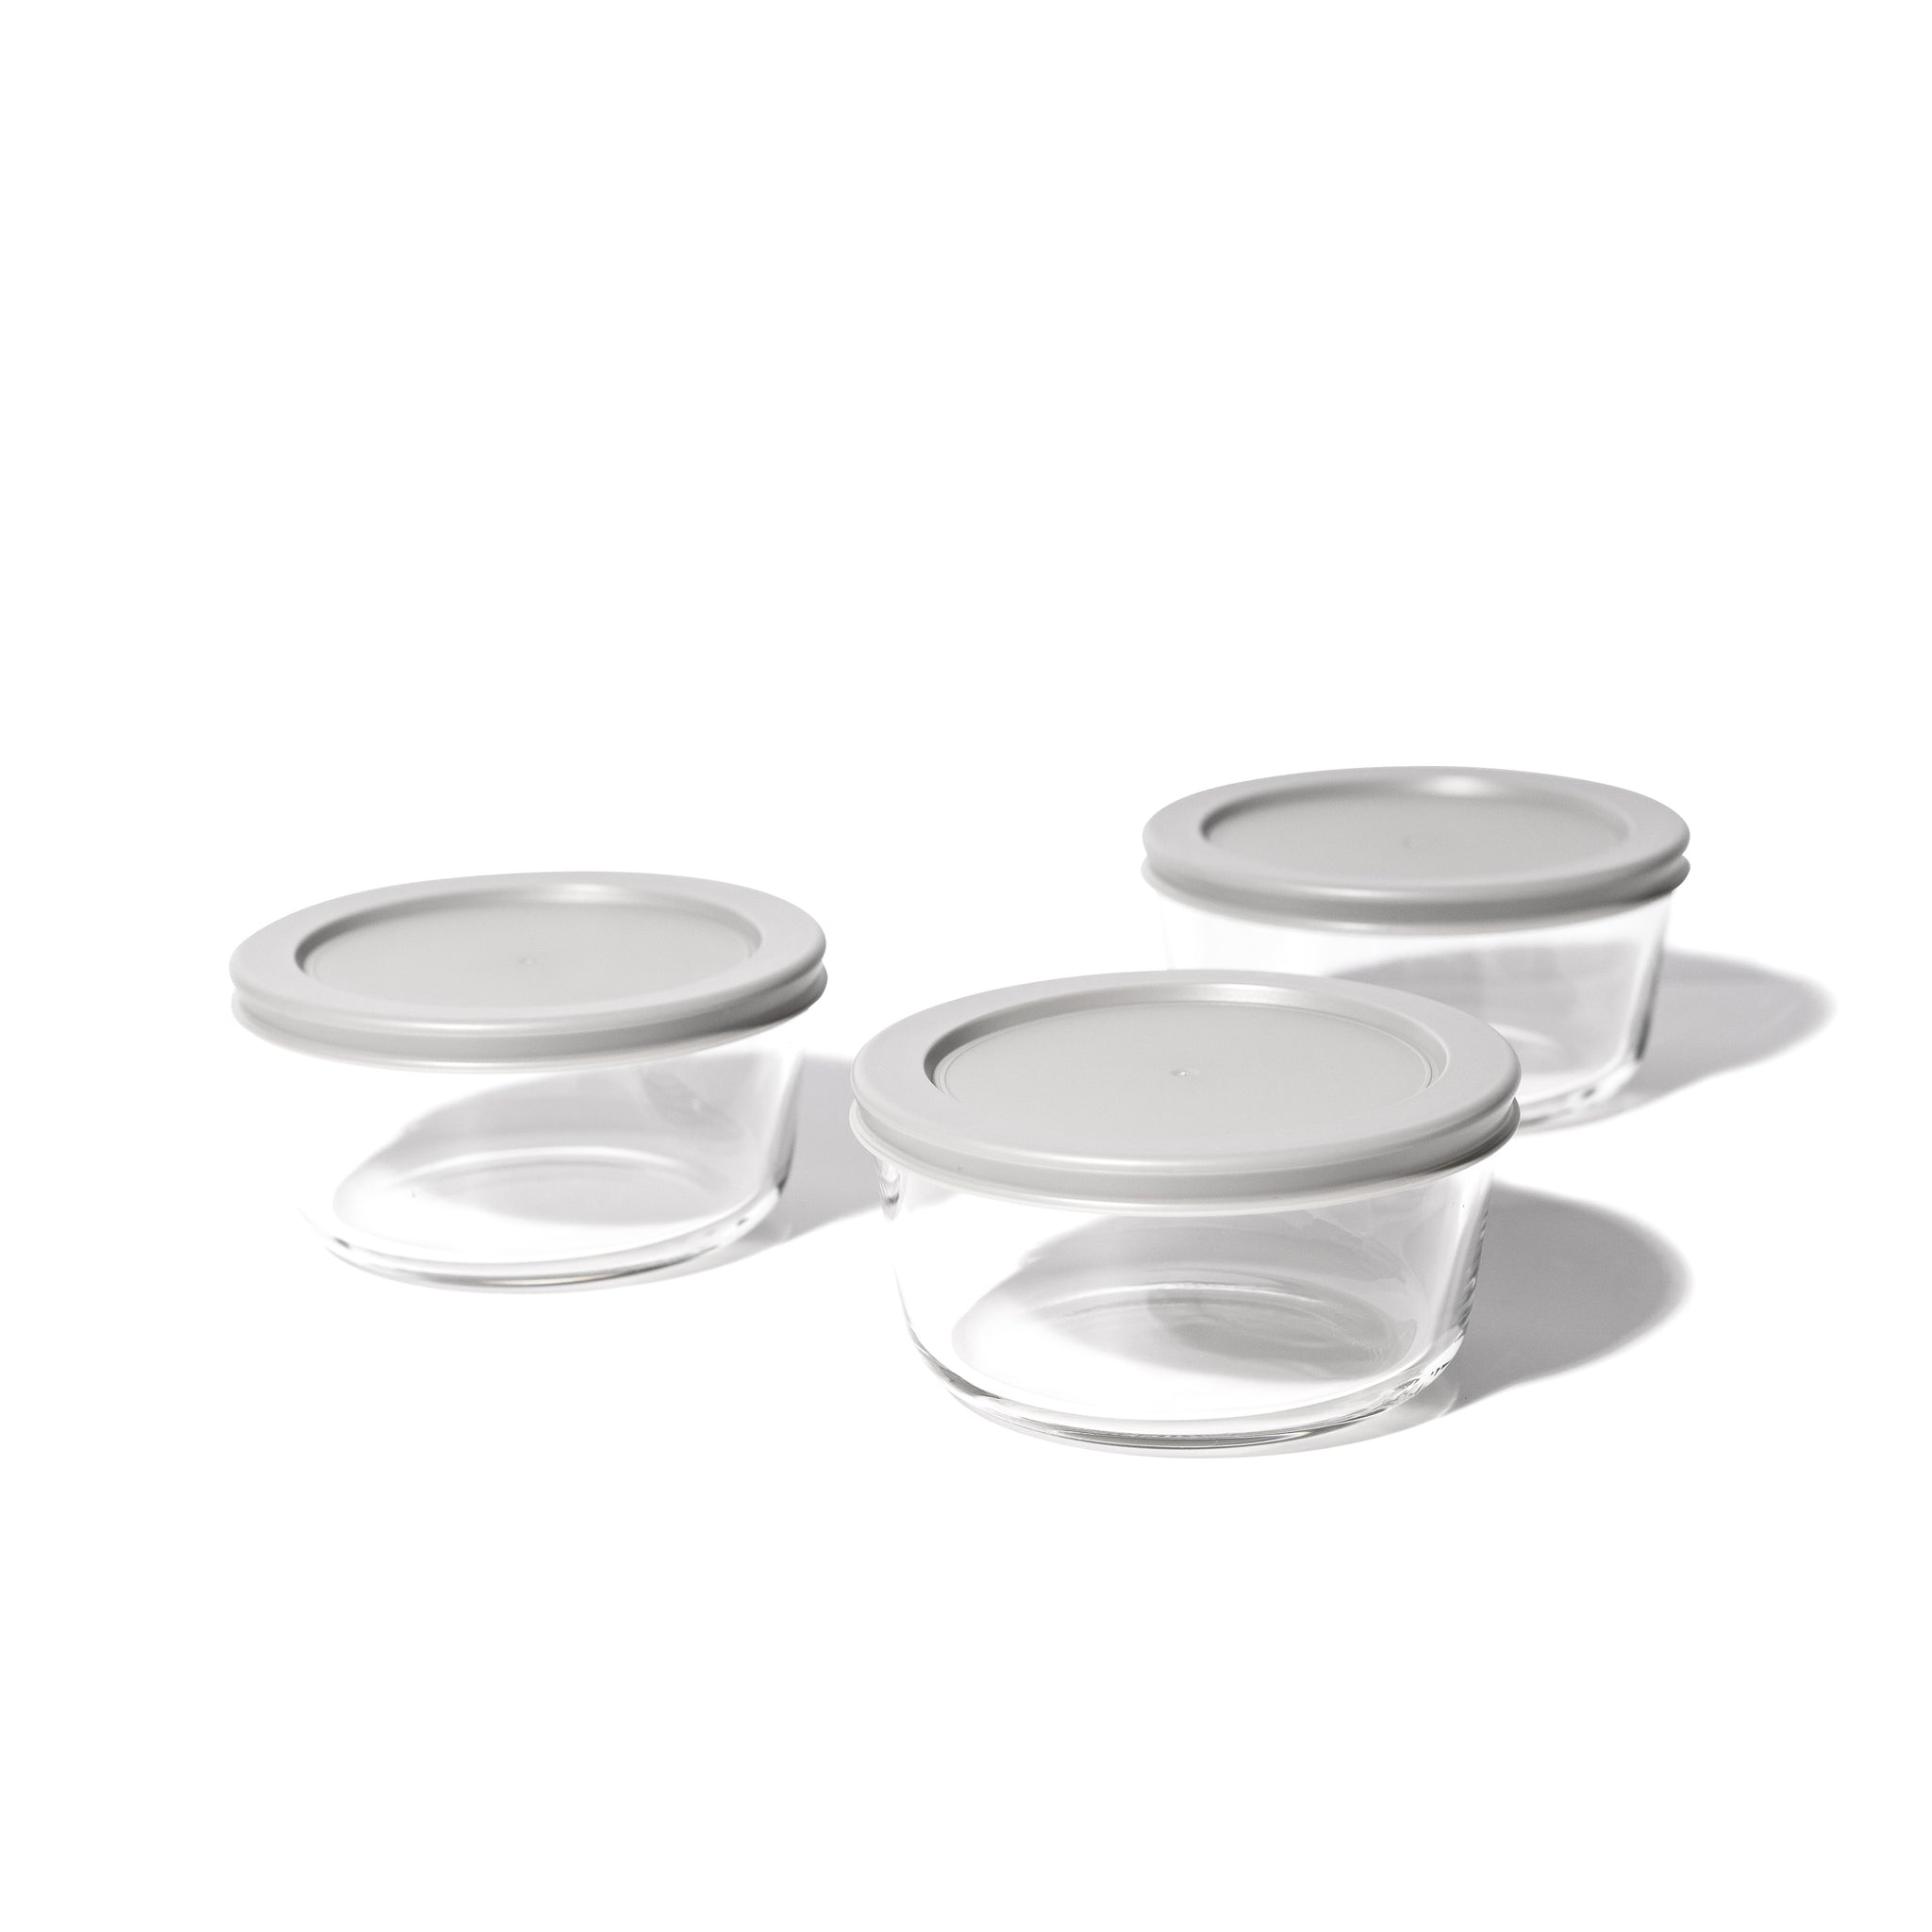 Glass Food Storage Containers - 6 Piece 2 Cup Set (3 Containers + 3 Lids)